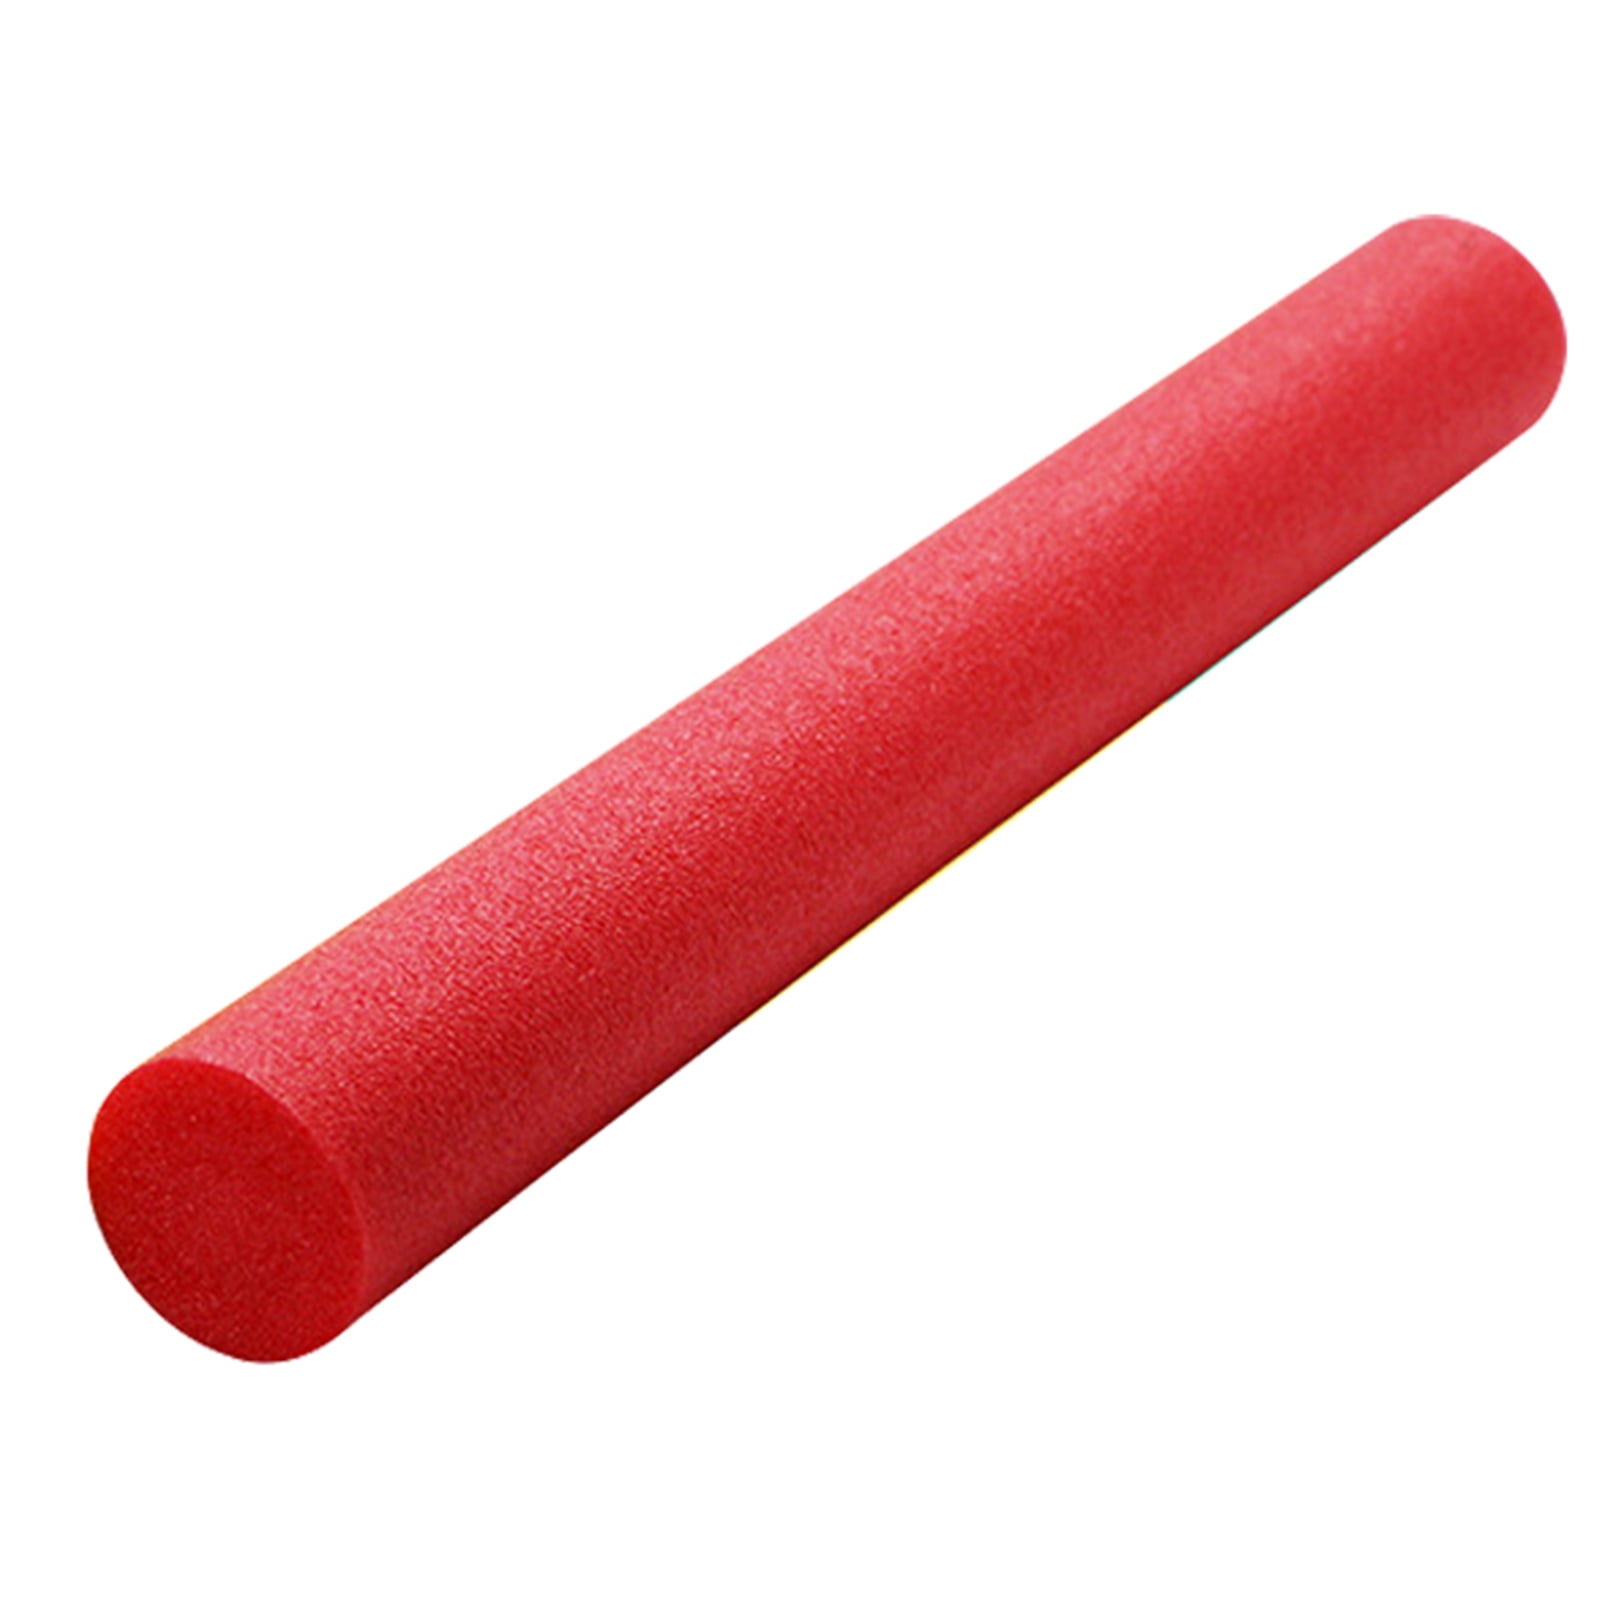 Swimming swim pool noodle water float aid foam float for children and adult OCL 